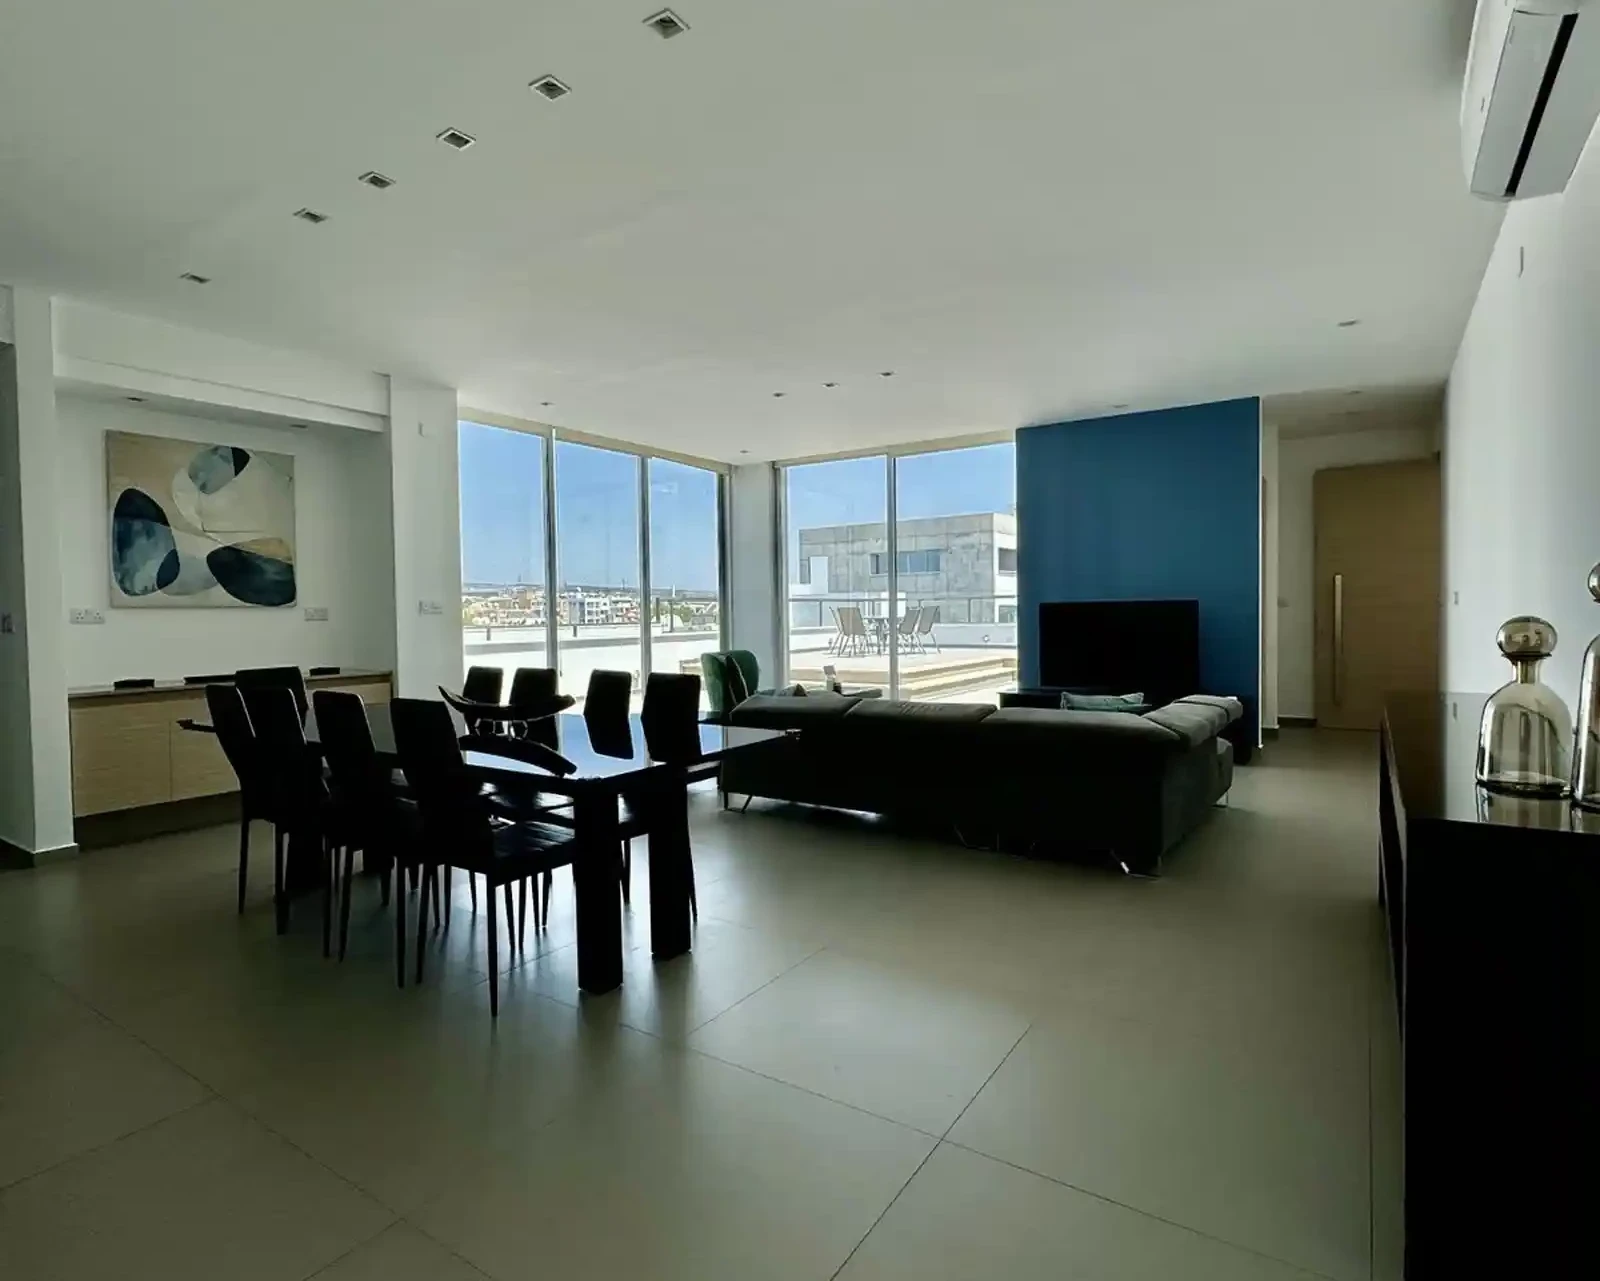 3-bedroom penthouse to rent €3.000, image 1